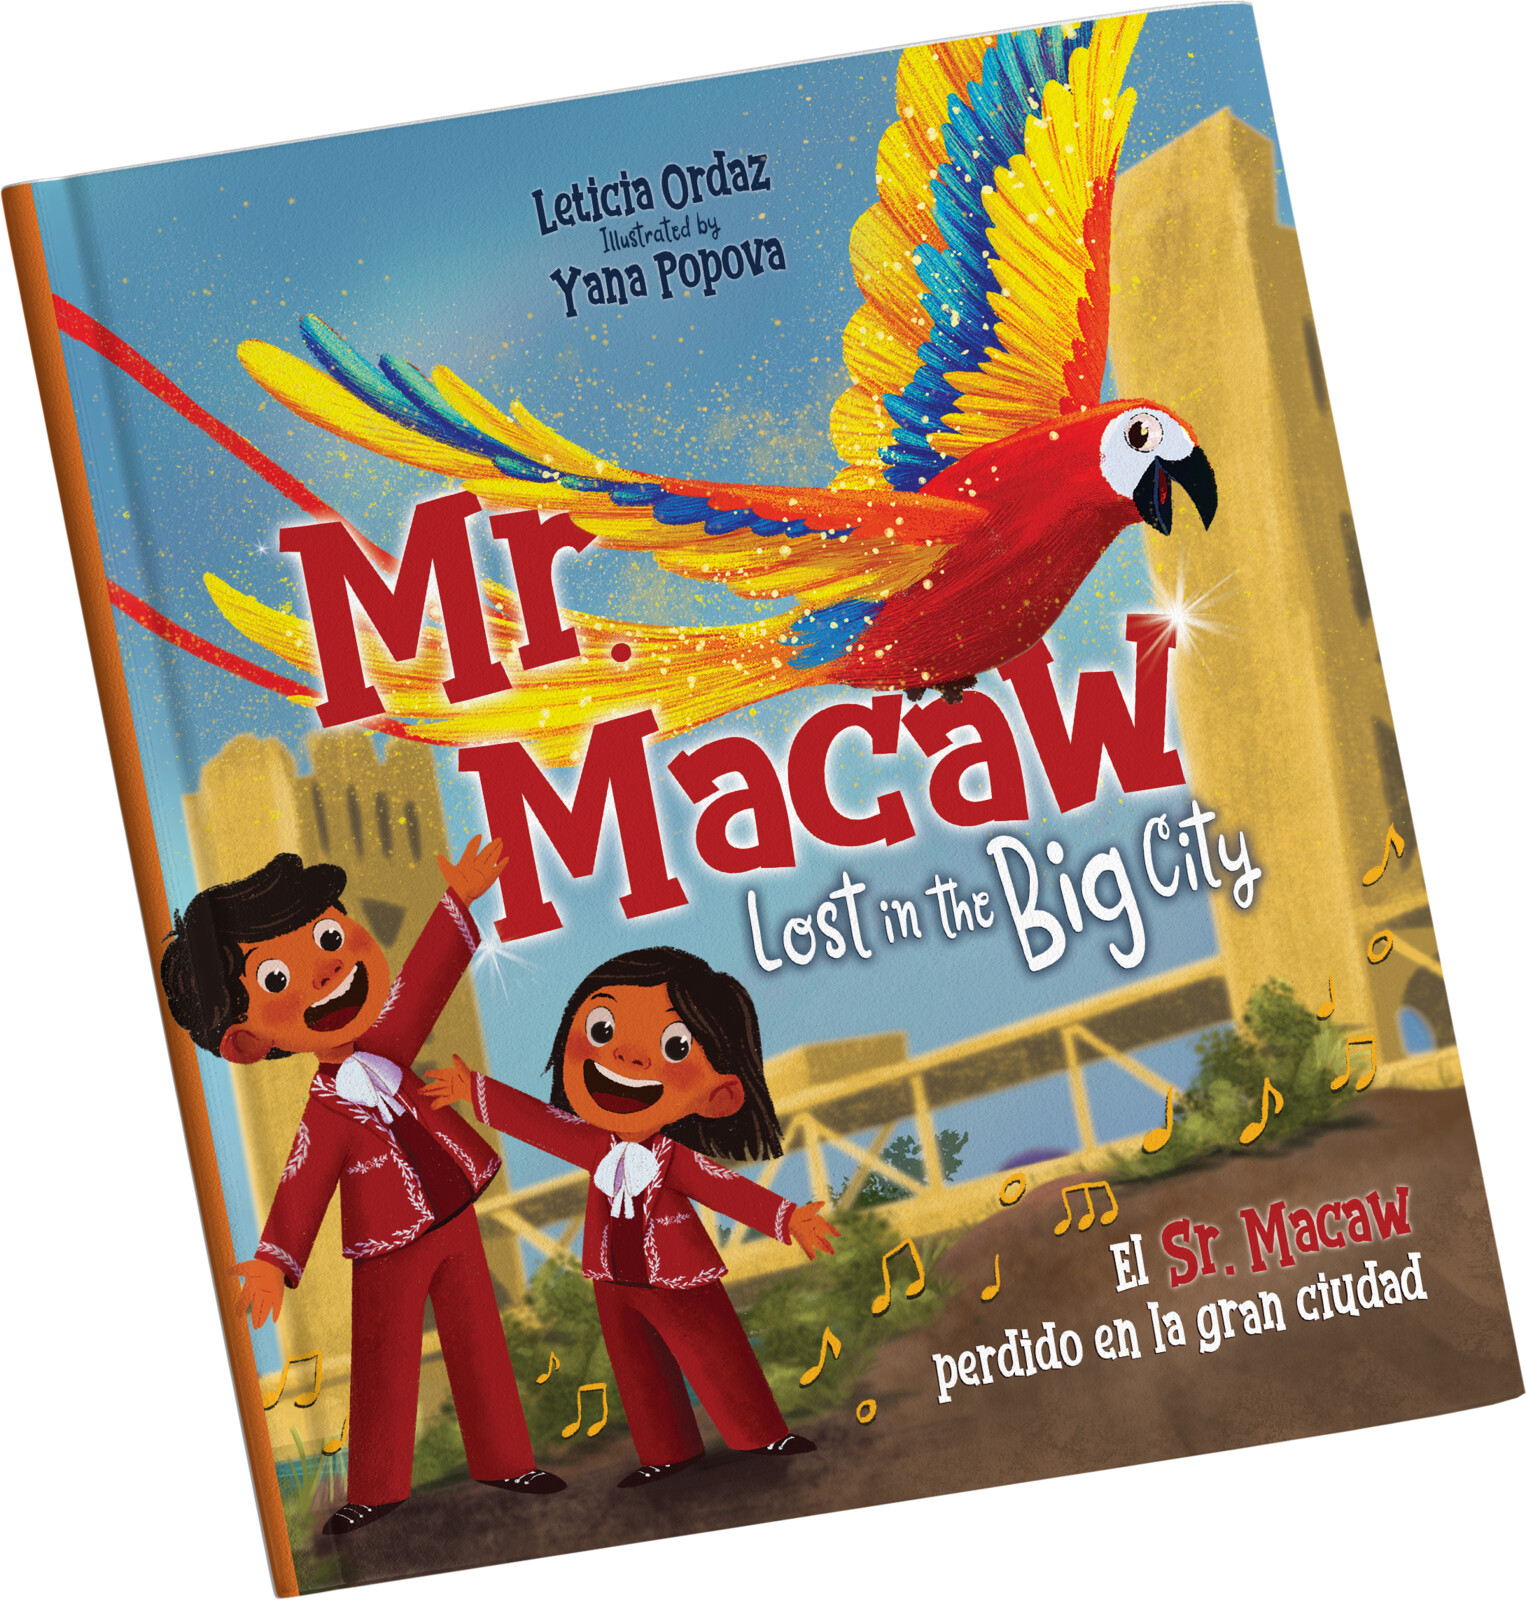 Coming soon: Mr. Macaw Lost in the Big City